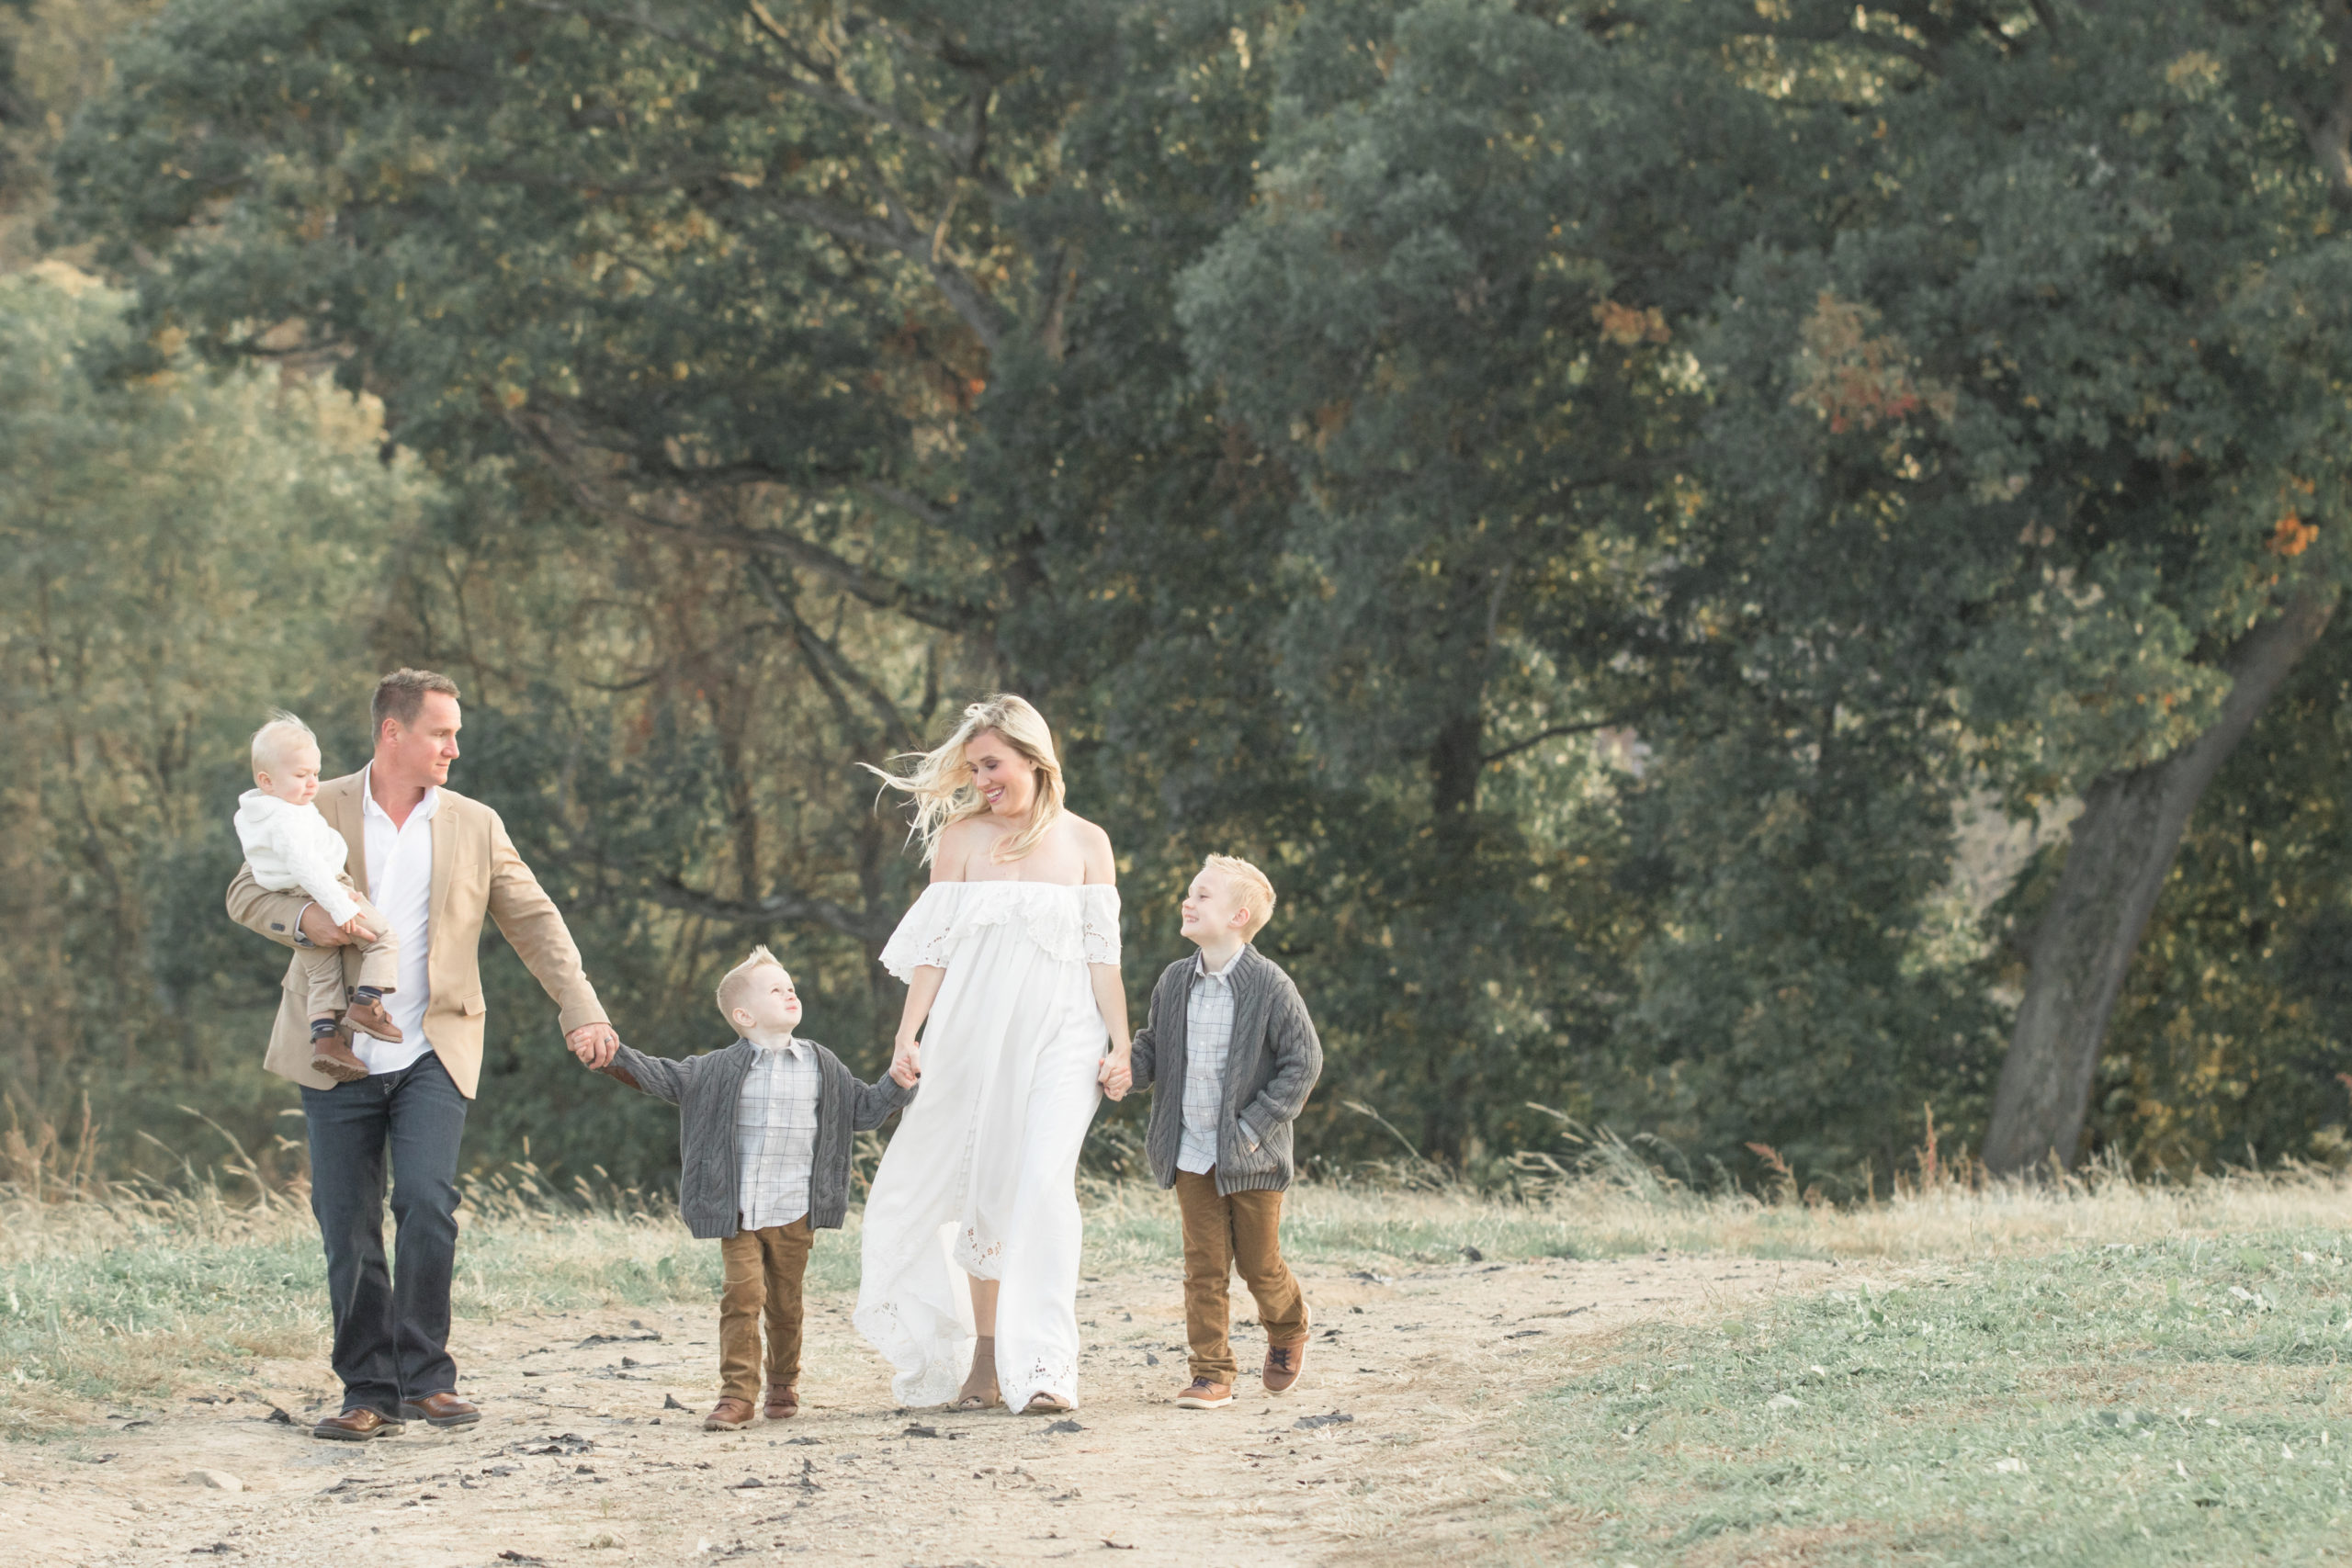 styled family walking on path through field at sunset | petite magnolia photography